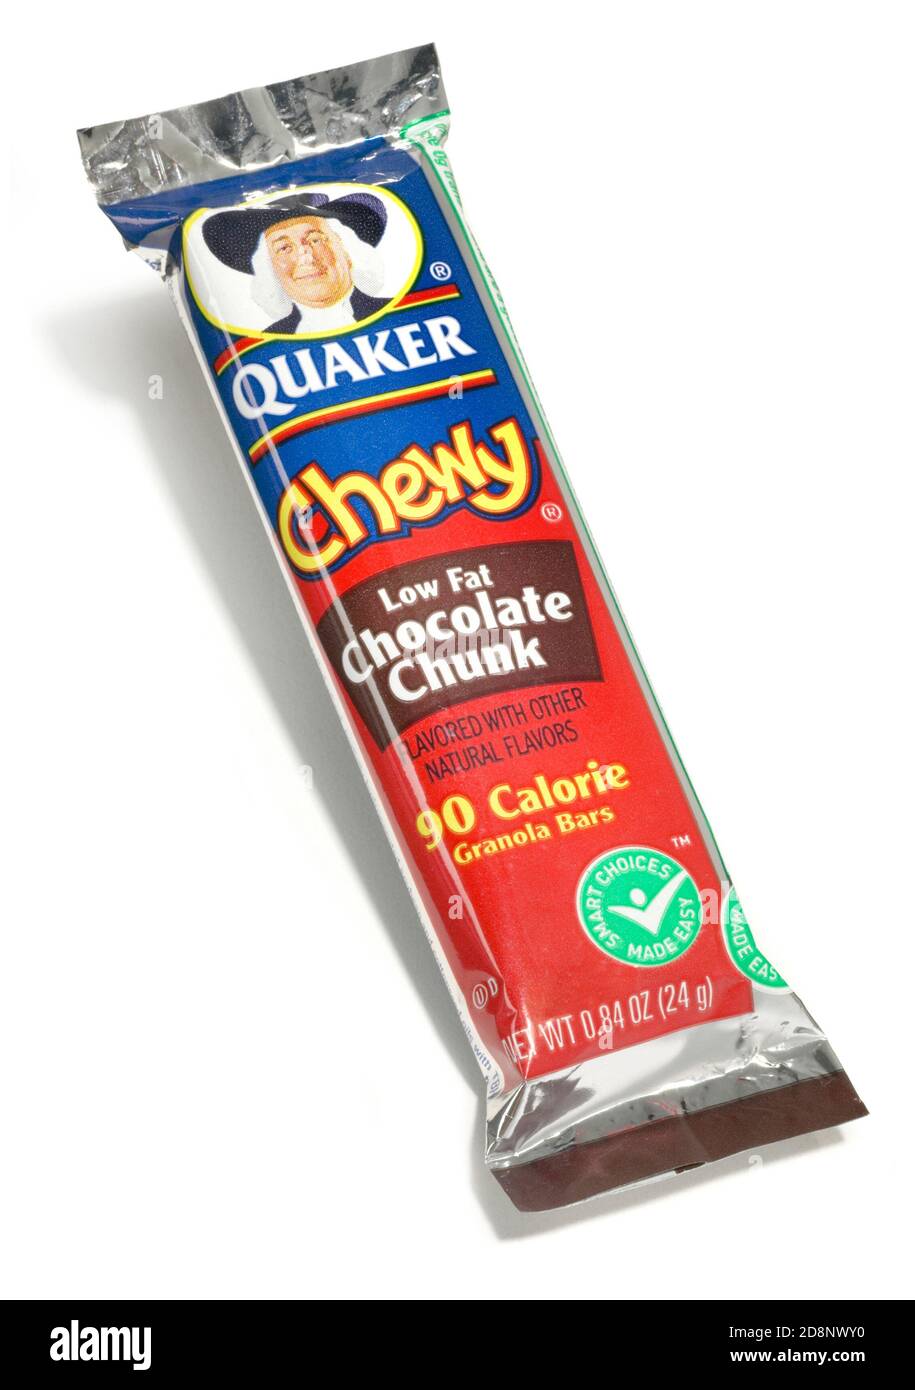 https://c8.alamy.com/comp/2D8NWY0/quaker-oats-brand-chocolate-chunk-flavor-chewy-granola-bar-photographed-on-a-white-background-2D8NWY0.jpg